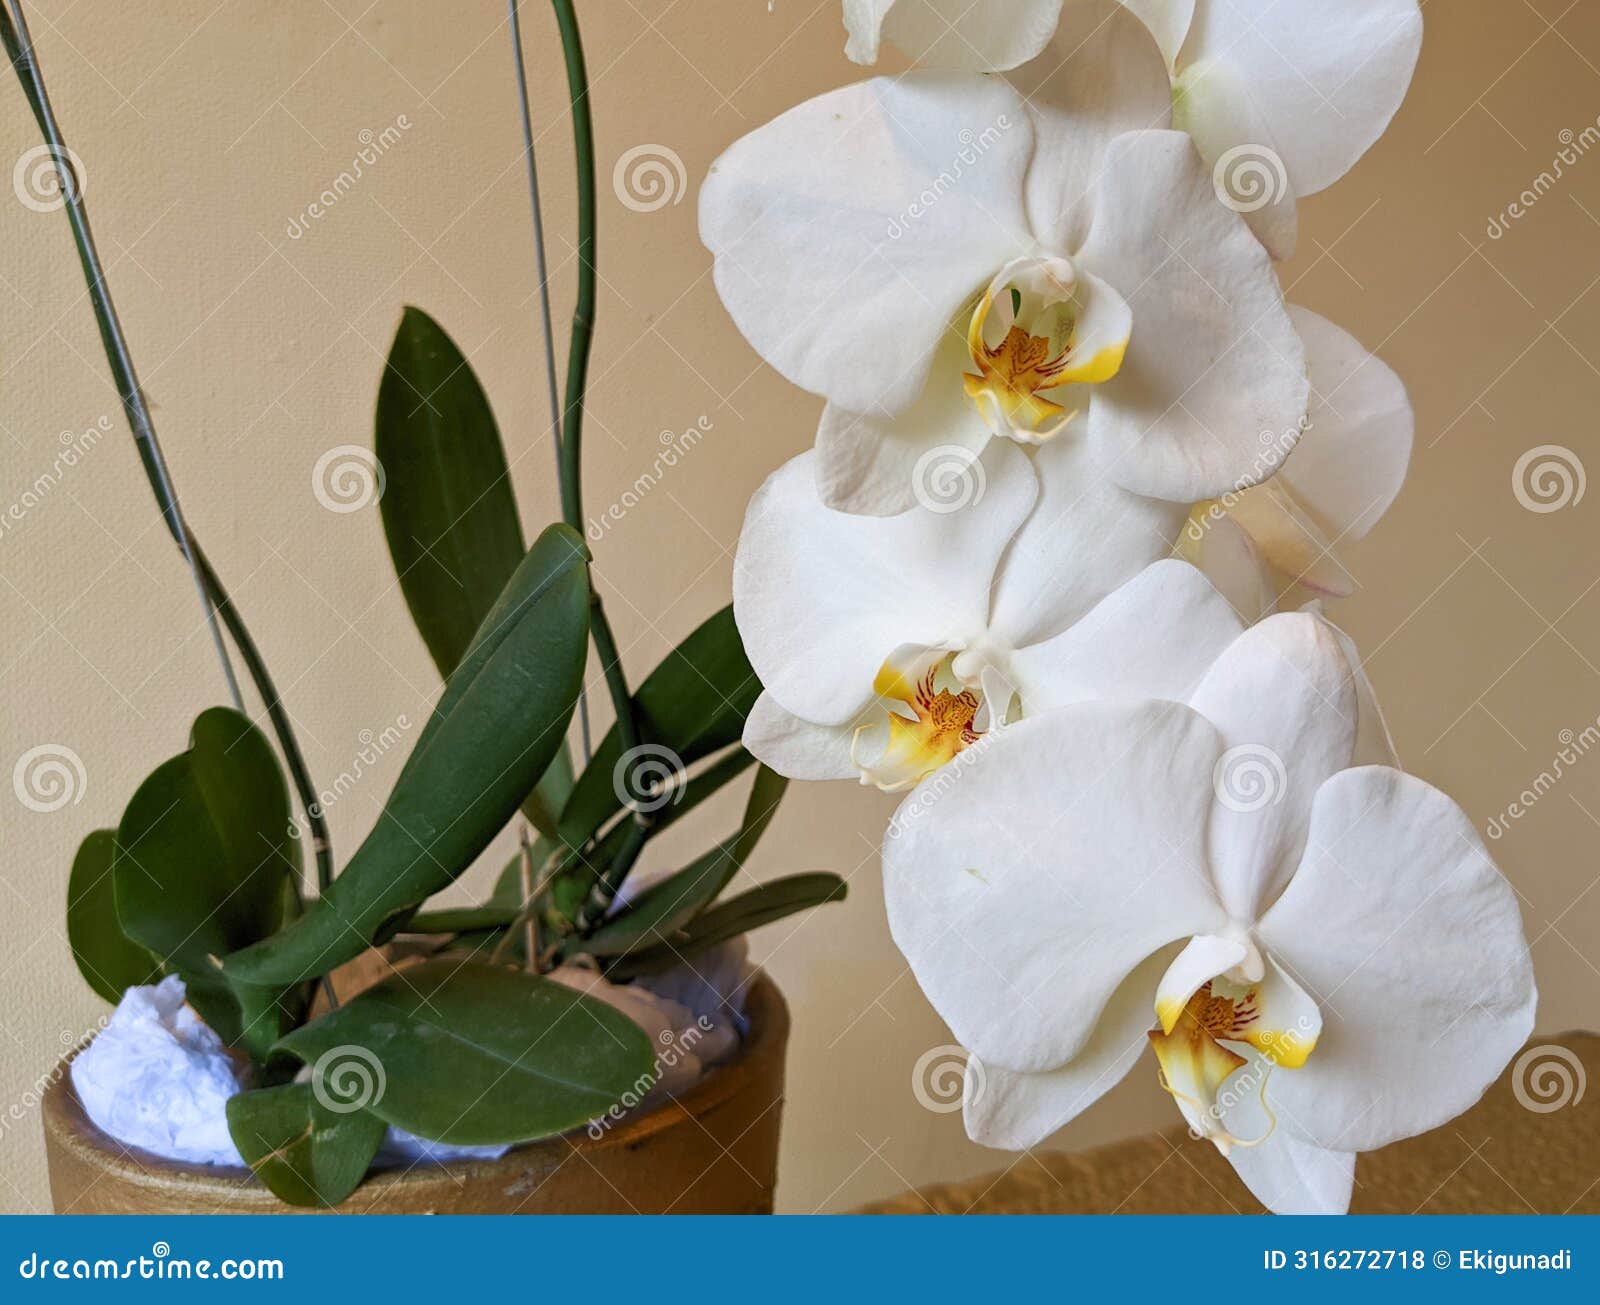 the moon orchid & x28;phalaenopsis amabilis& x29; can be used as interior  s that impart an elegant impression.